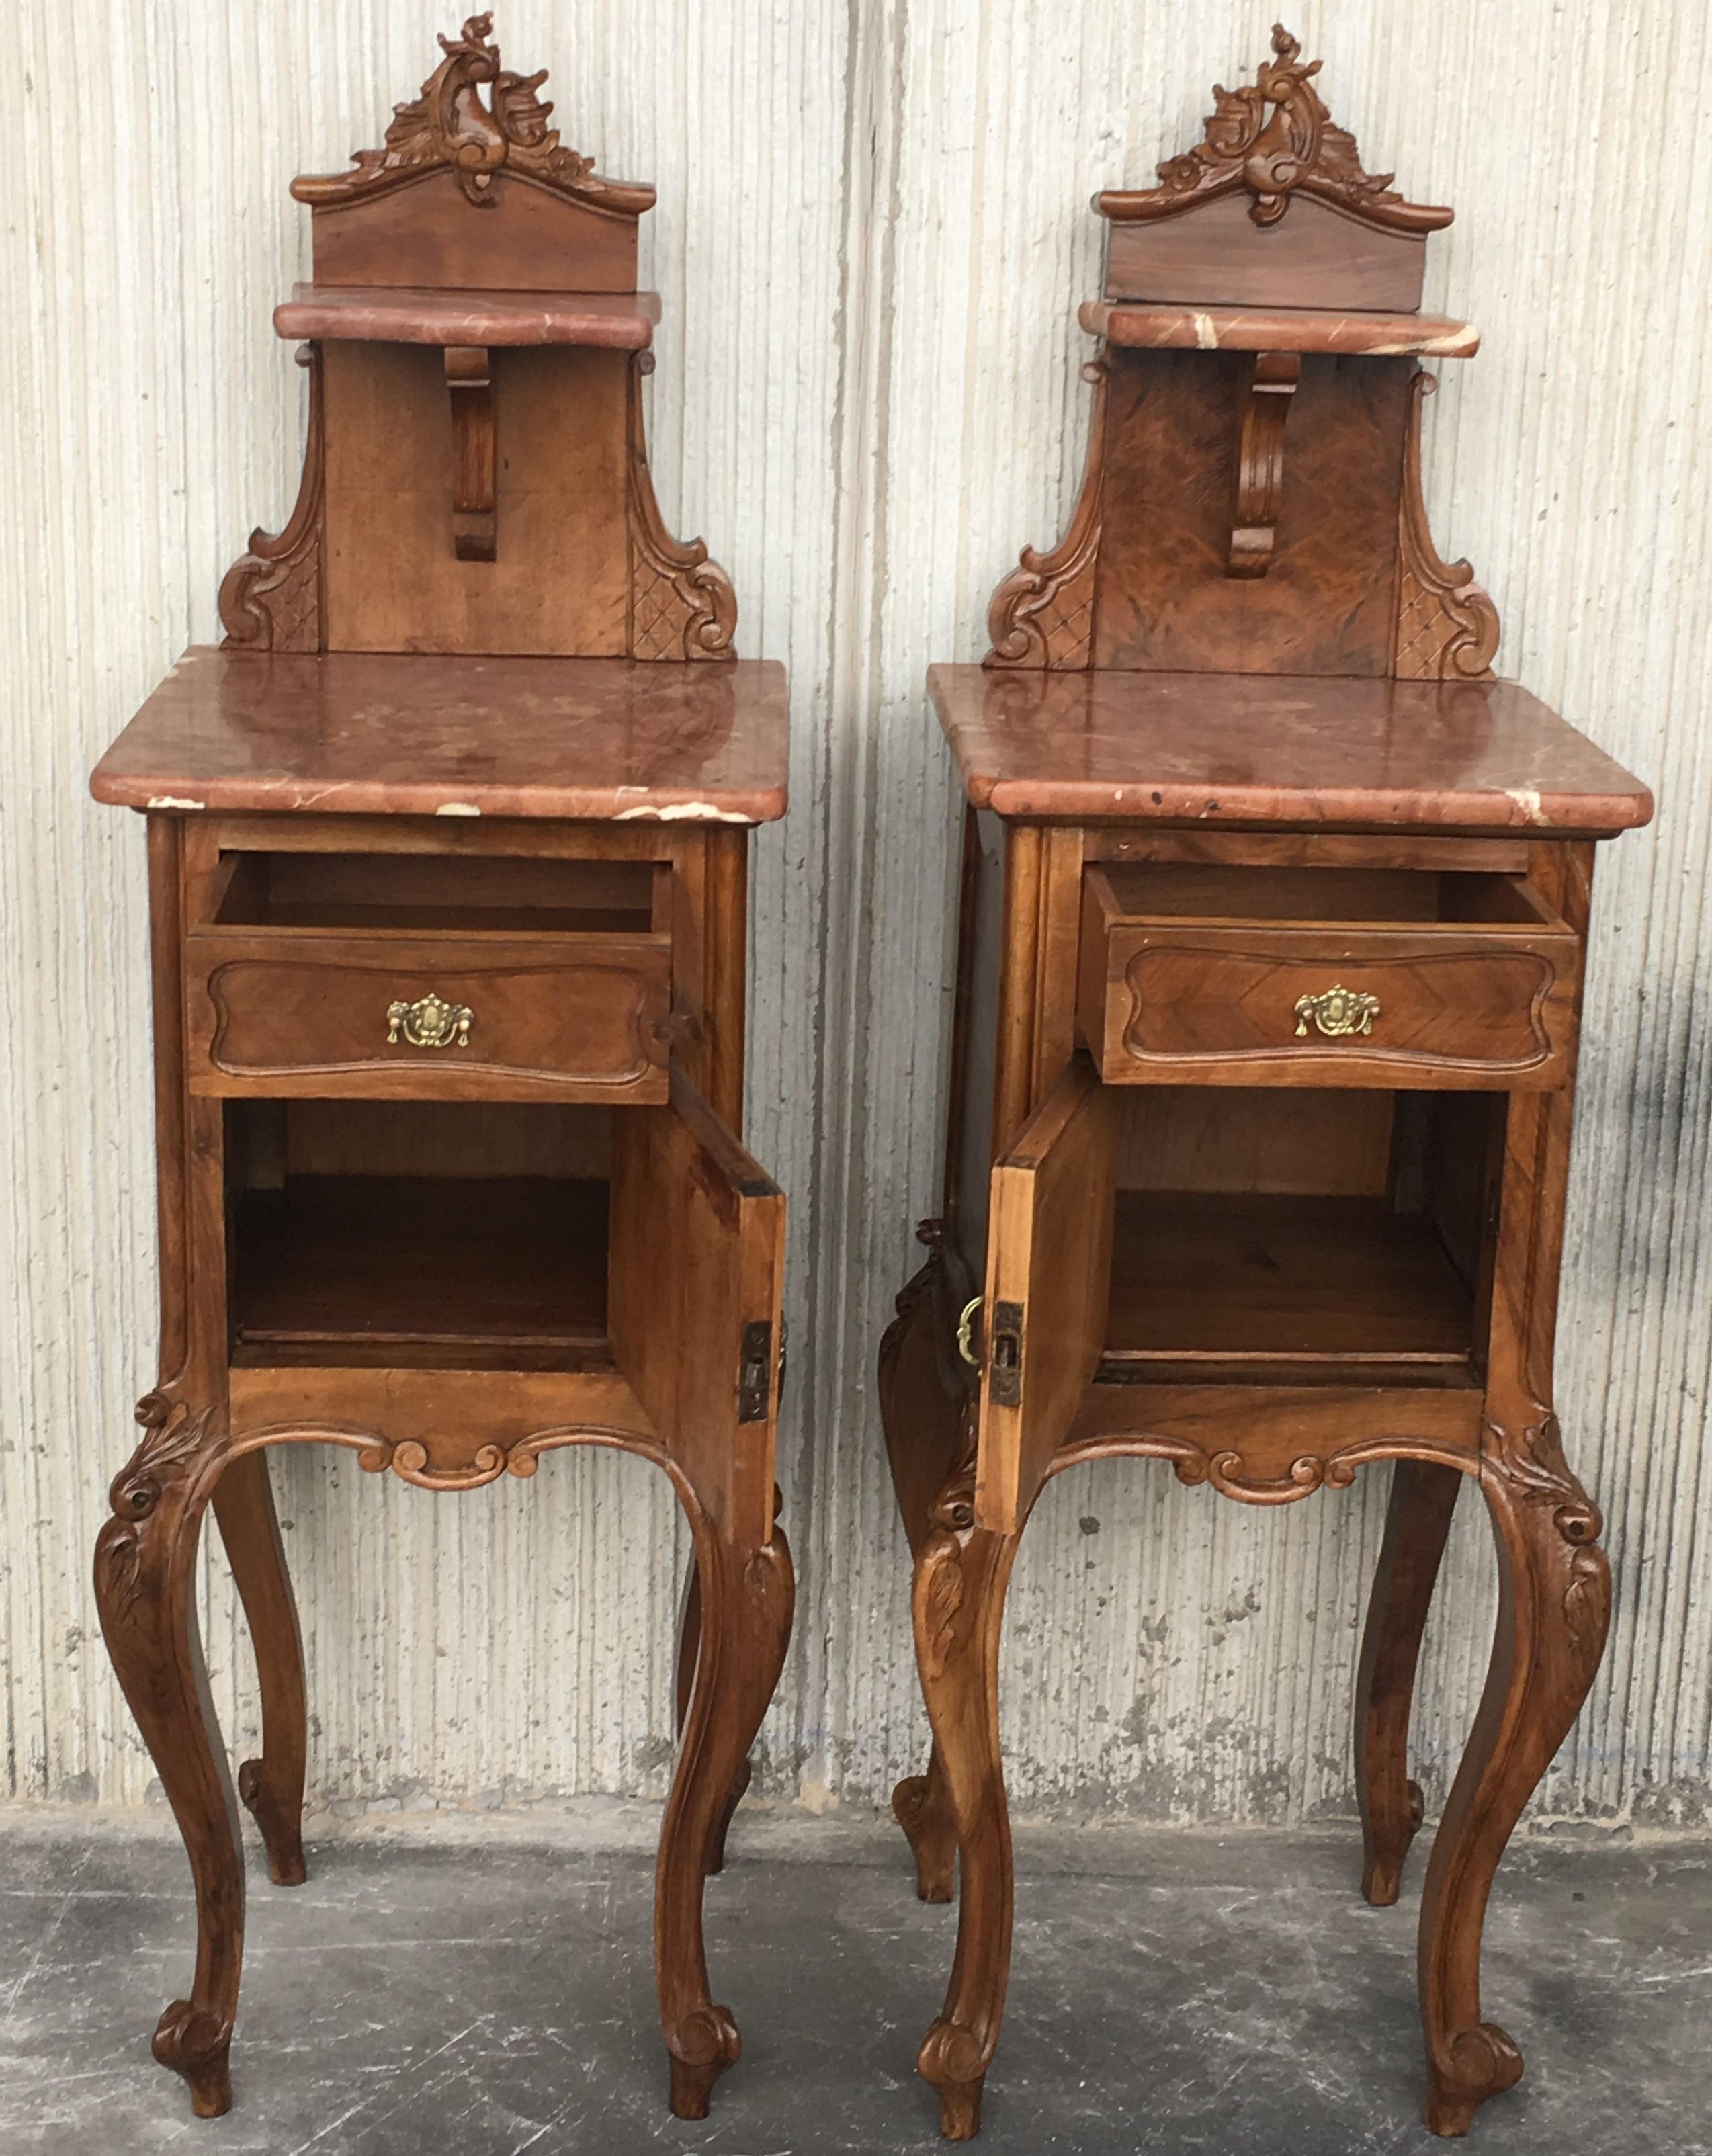 Spanish Colonial Tall and High Top Solid Oak Bedside Cabinets with Marble Top and Drawer